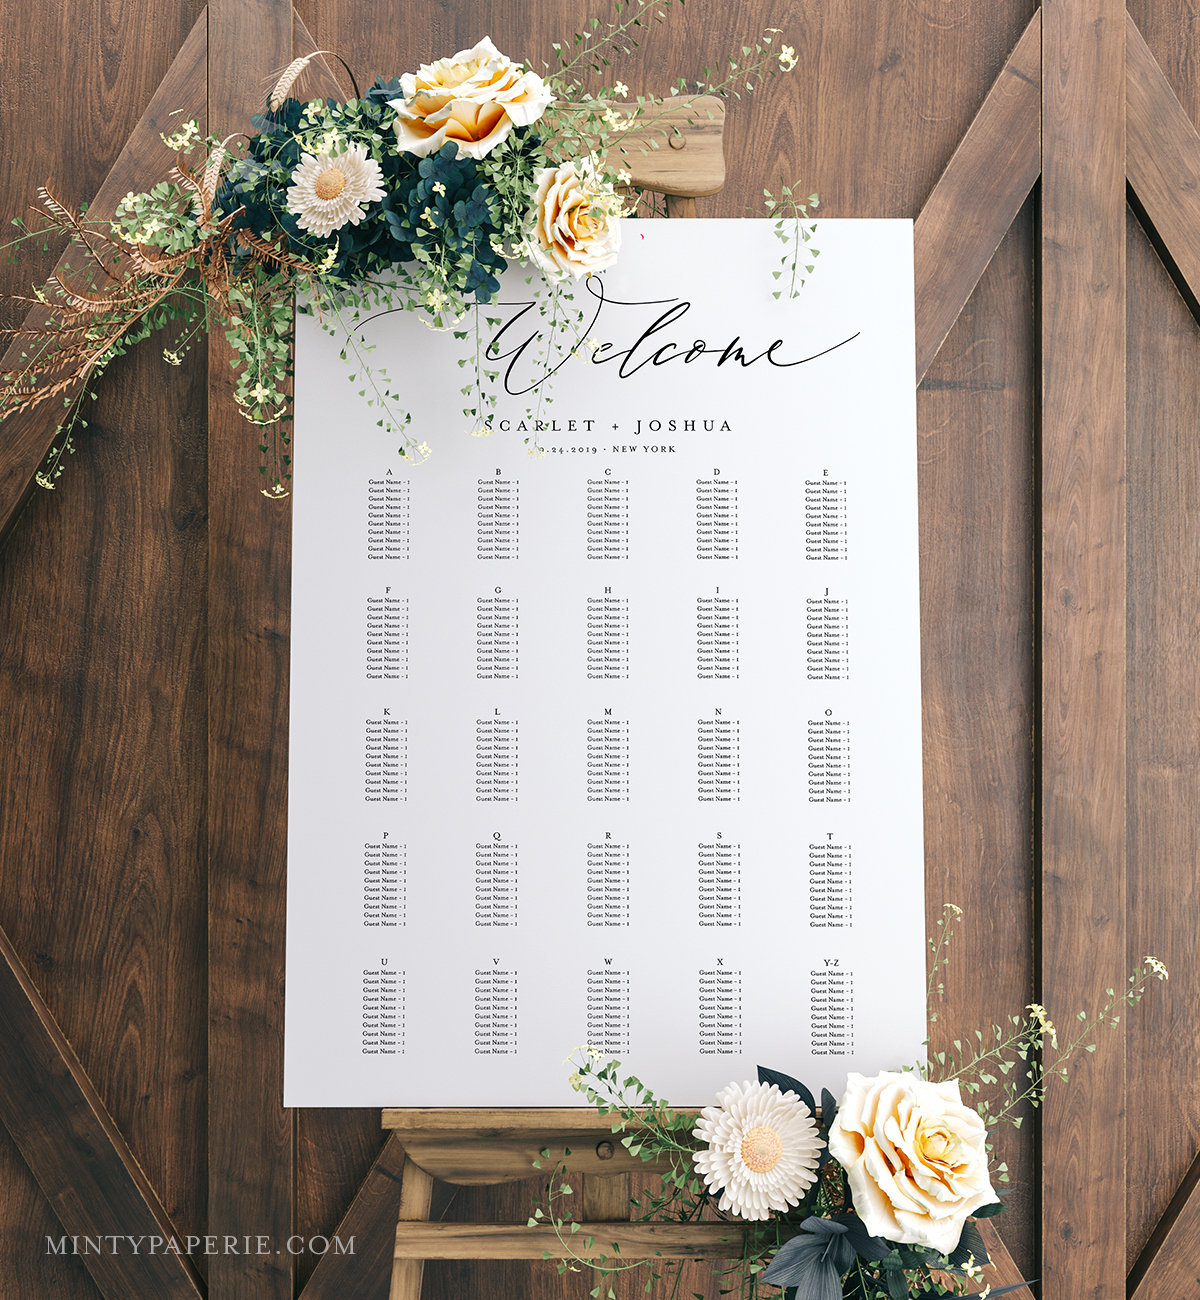 Alphabetical Seating Chart Template from i.etsystatic.com